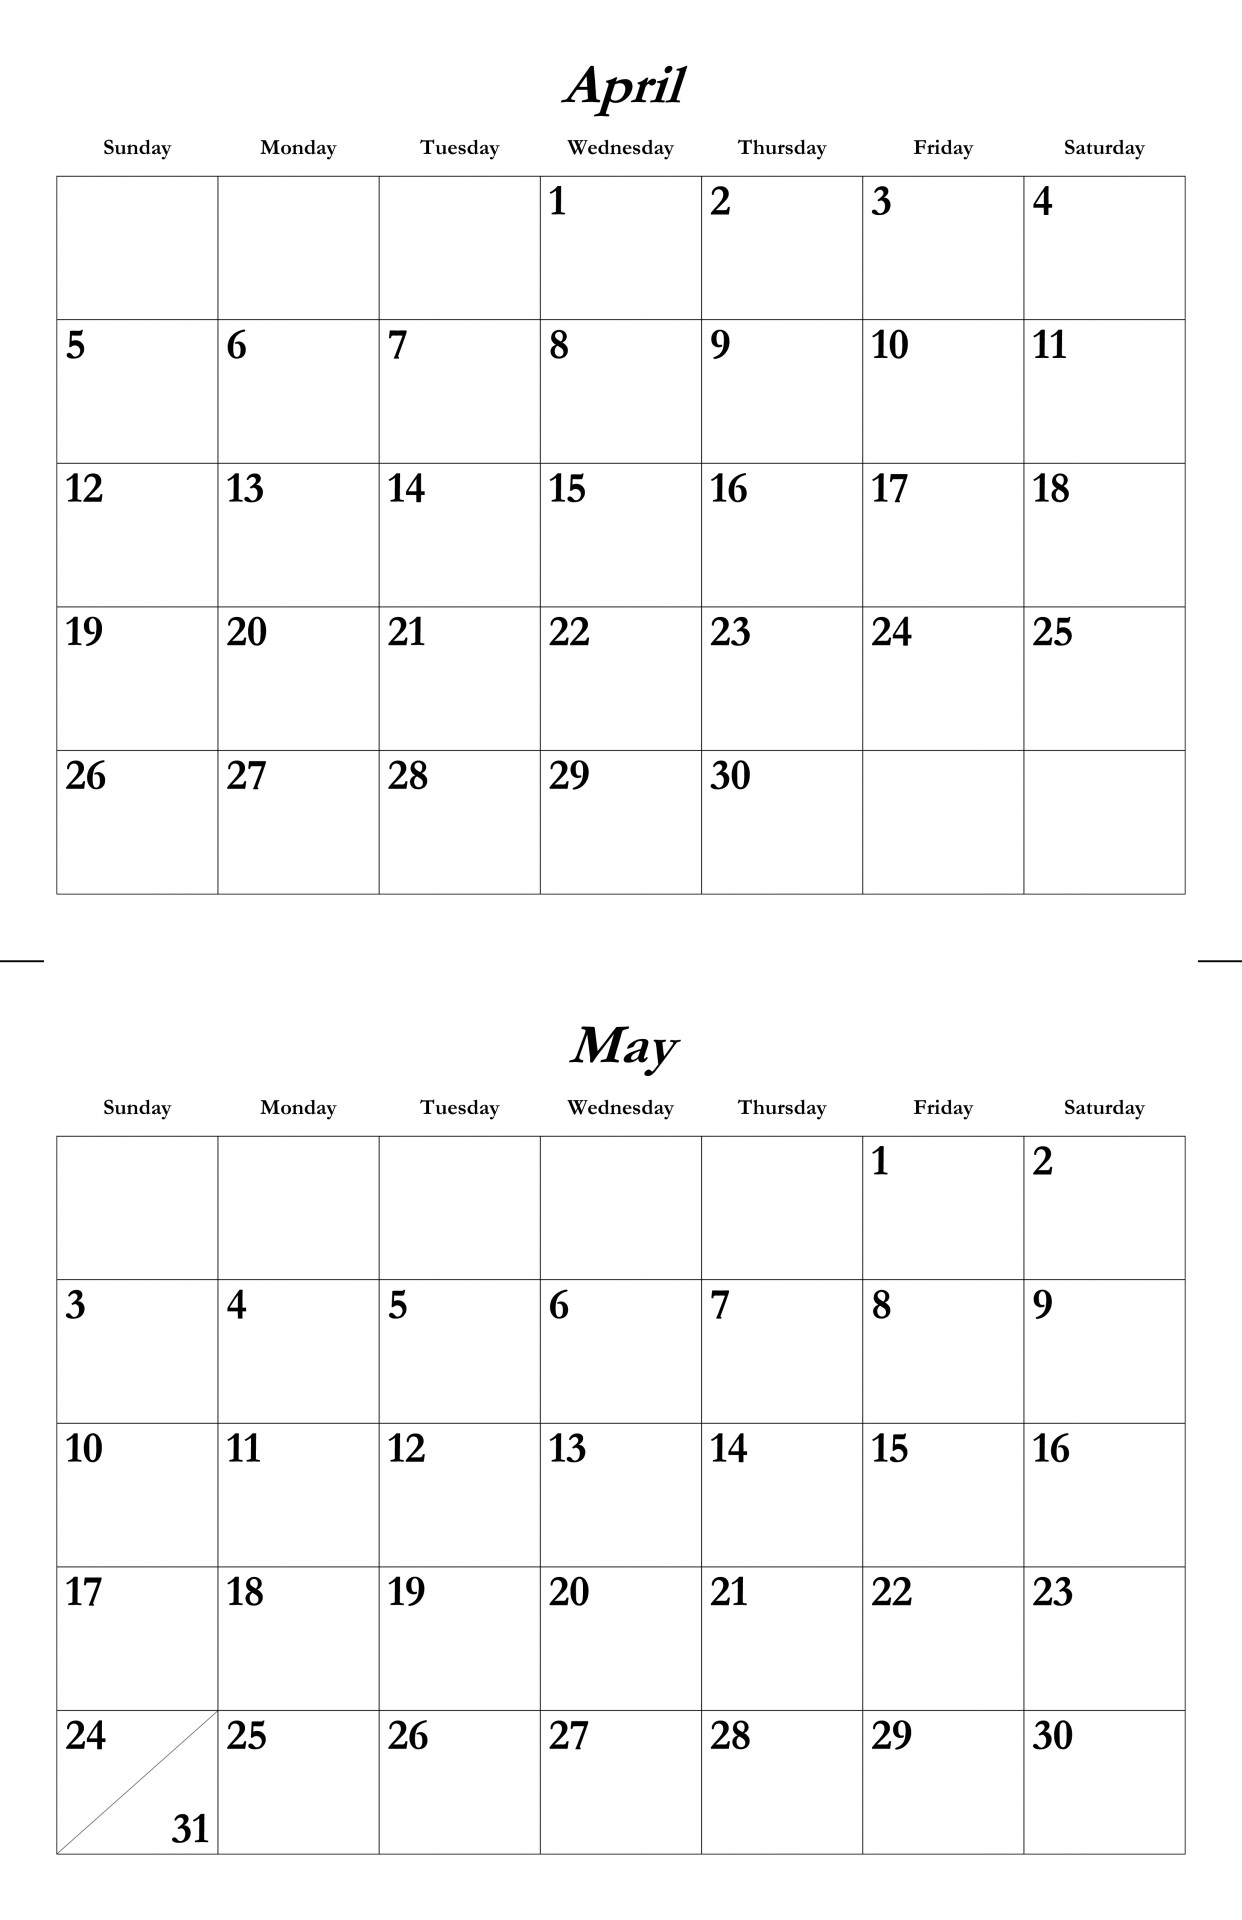 april may 2015 calendar planner free photo